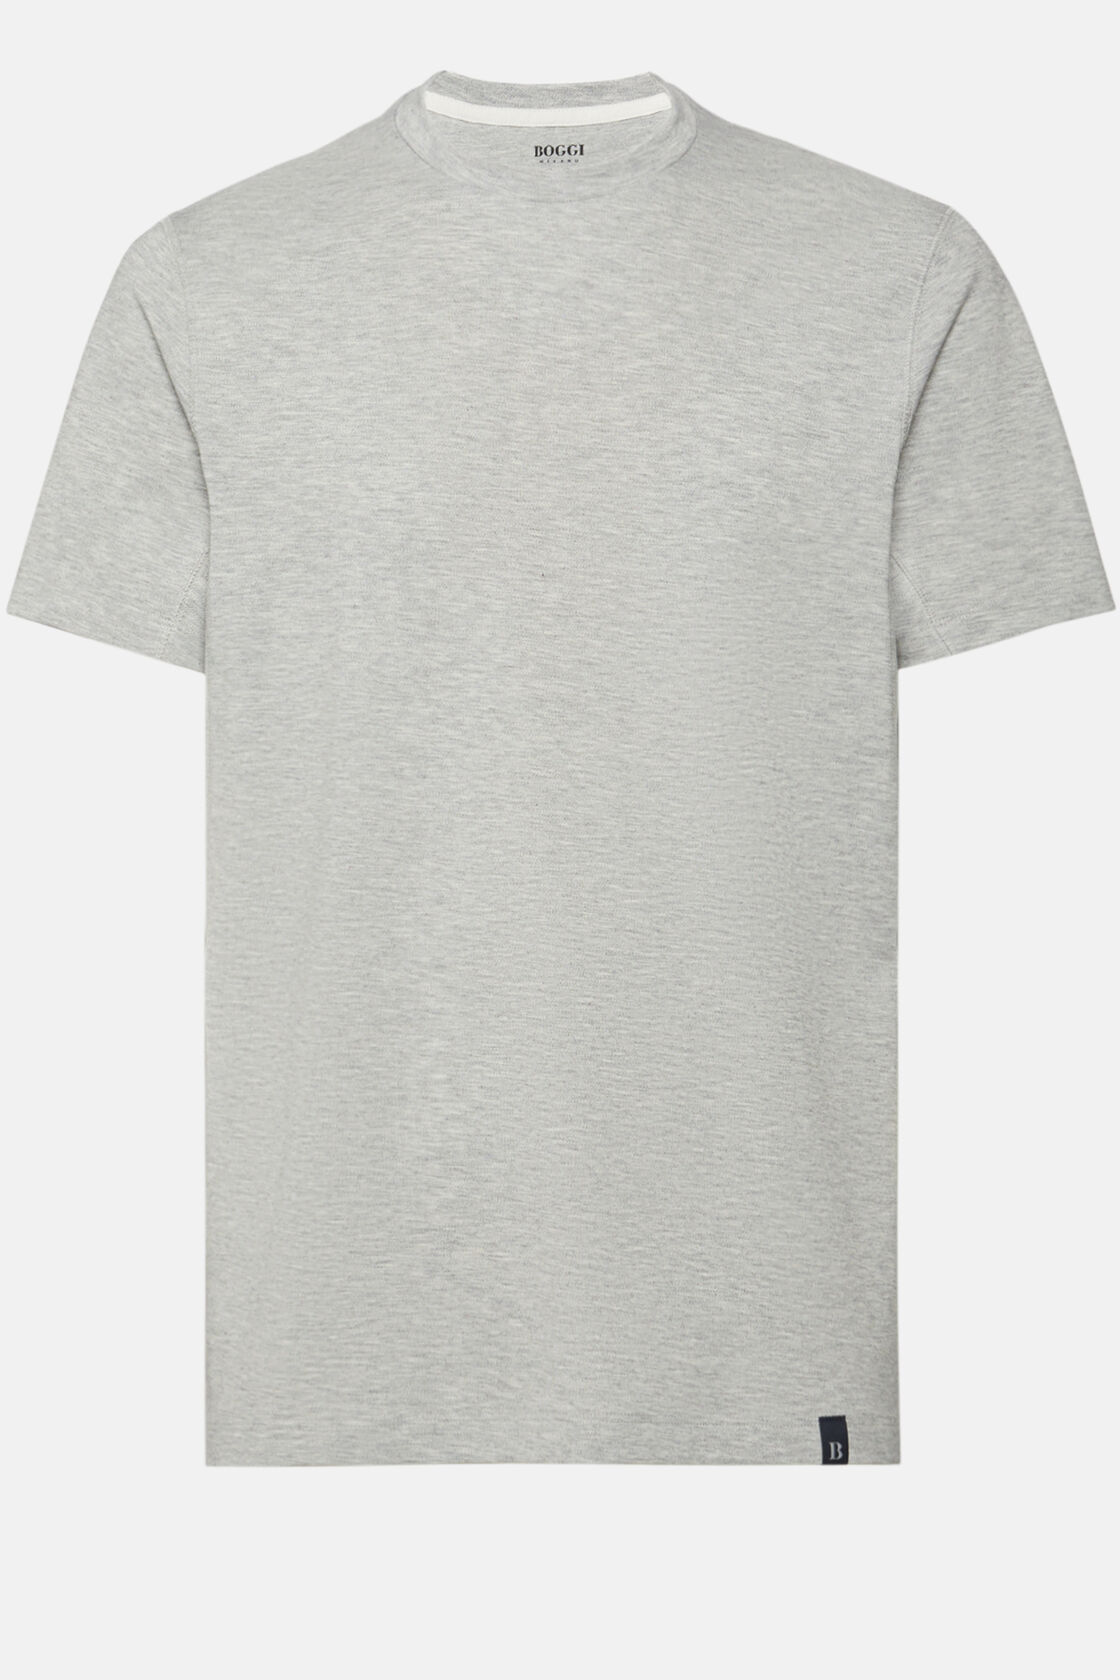 T-Shirt in Sustainable Performance Pique, Grey, hi-res